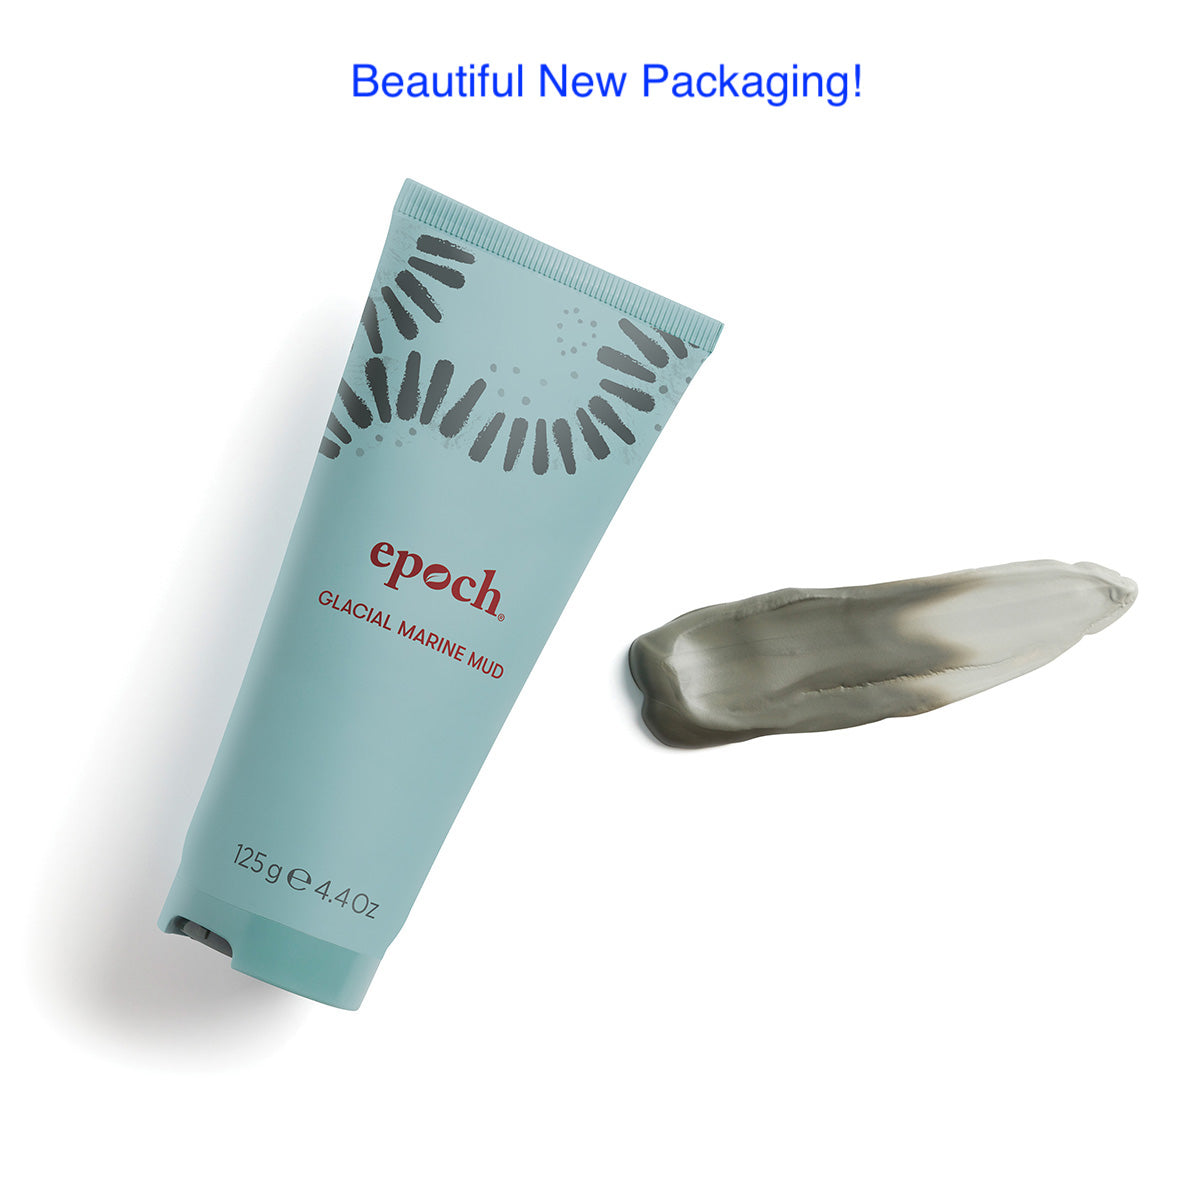 EPOCH® Glacial Marine Mud (discovered by Pacific West indigenous people for its skin benefits, sourced from Canada, free shipping)